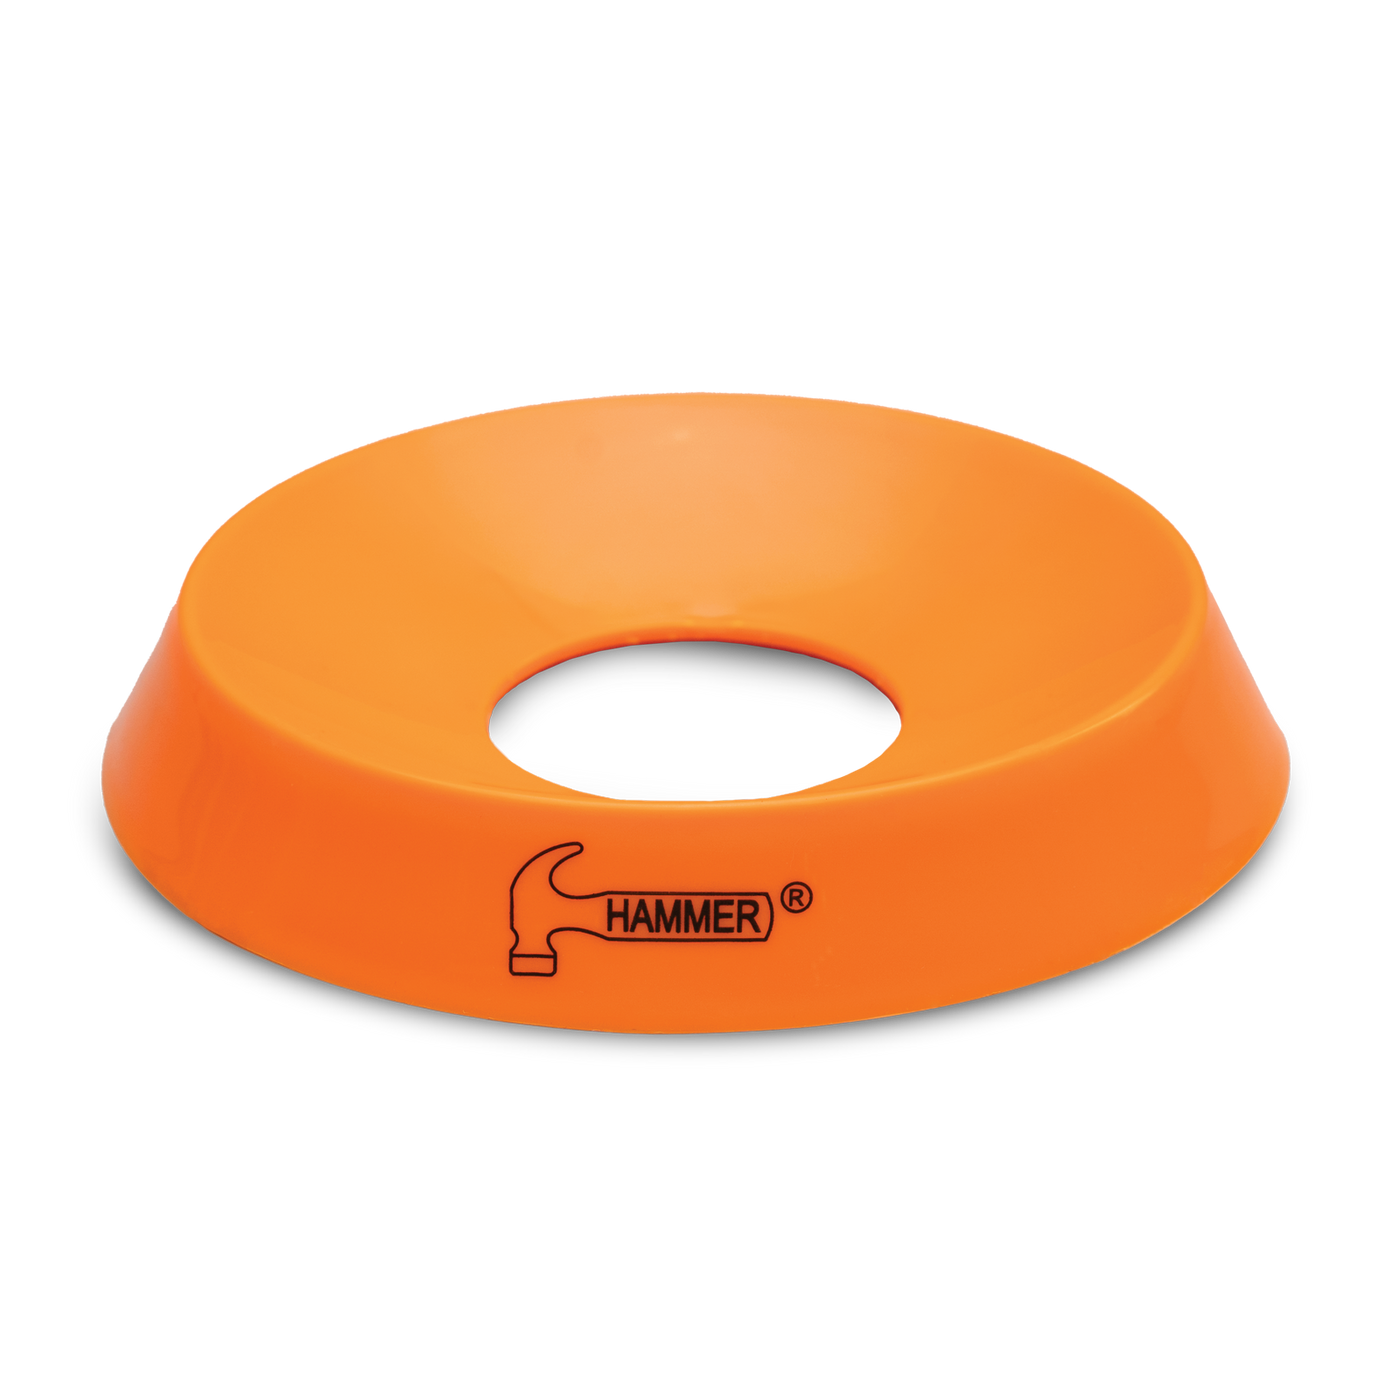 Orange ball cup with Hammer logo.